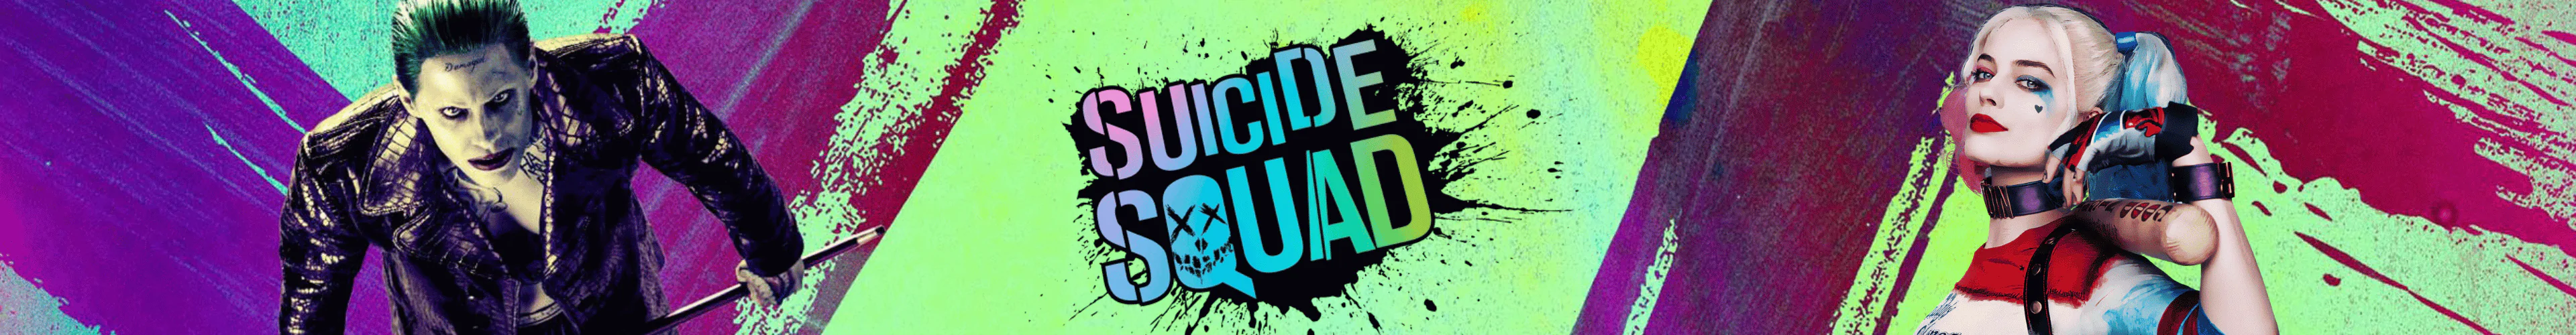 Suicide Squad posters banner